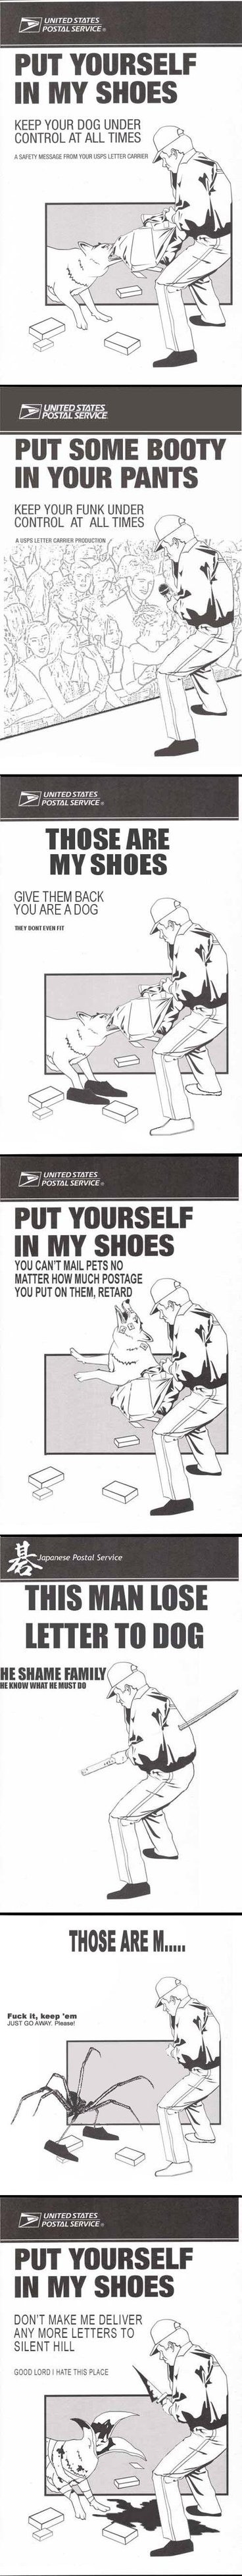 USPS posters